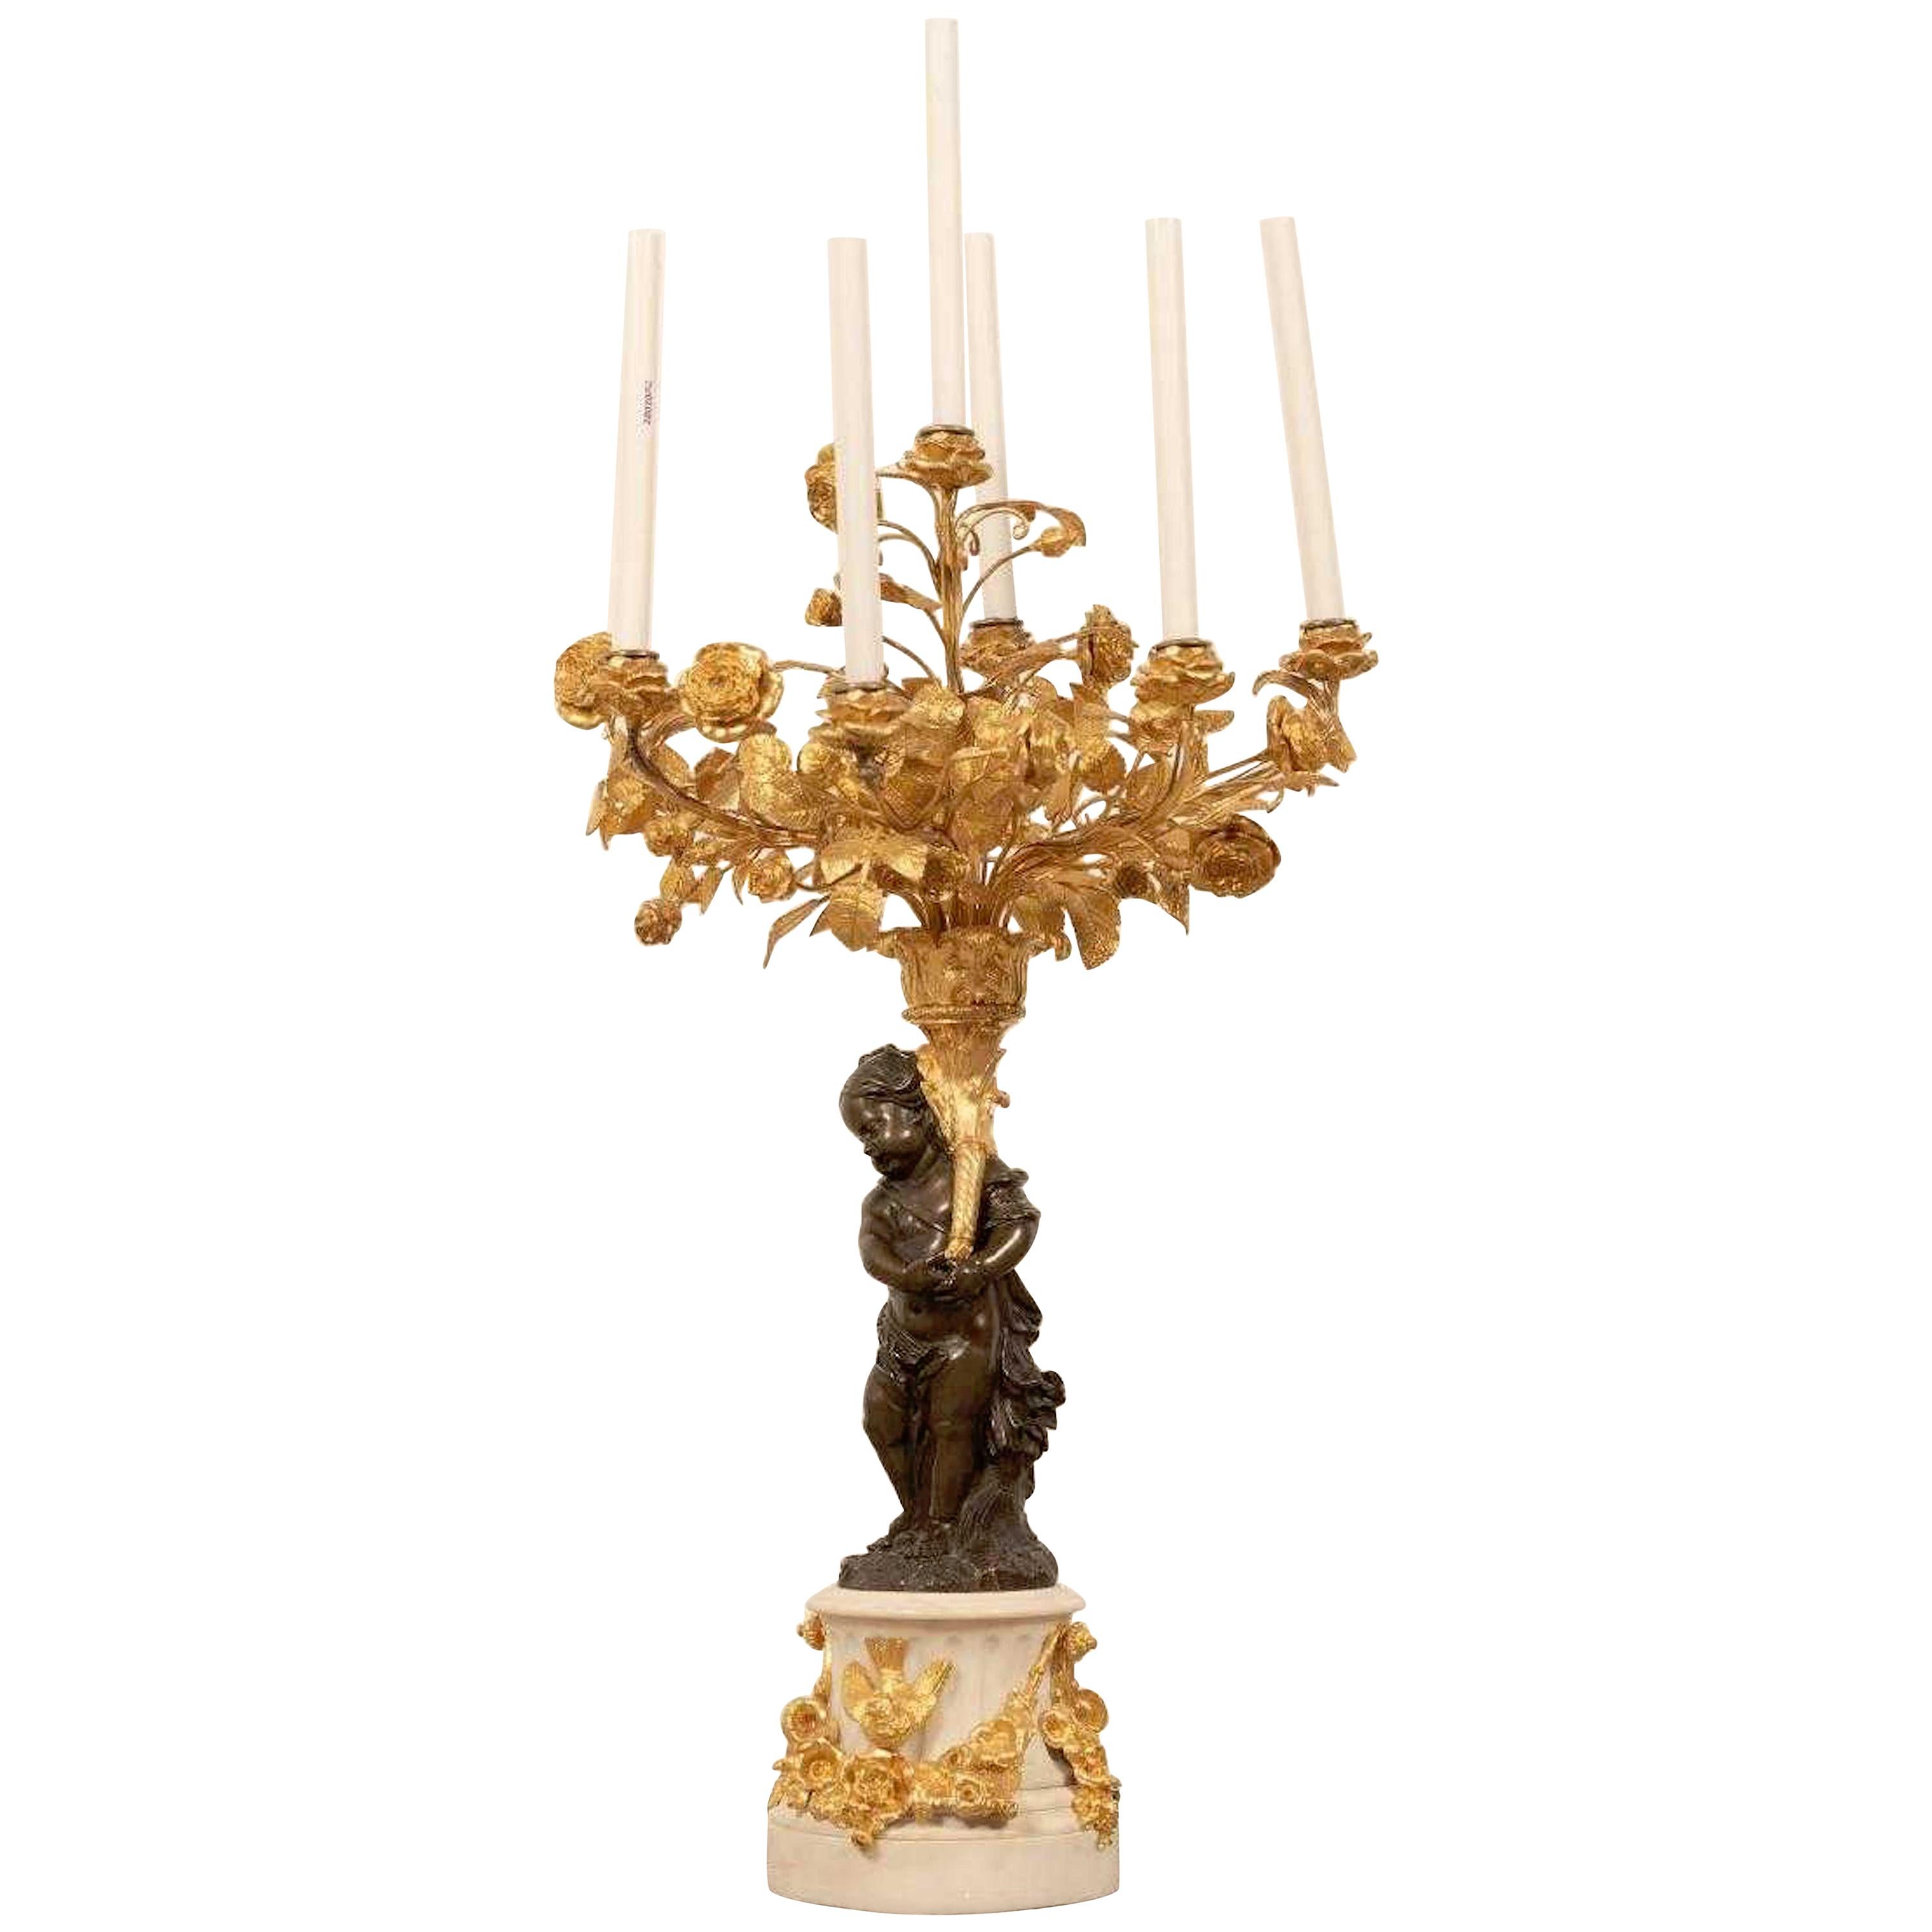 Monumental Single Louis XVI Style Ormolu and Patinated Seven-Light Candelabra For Sale